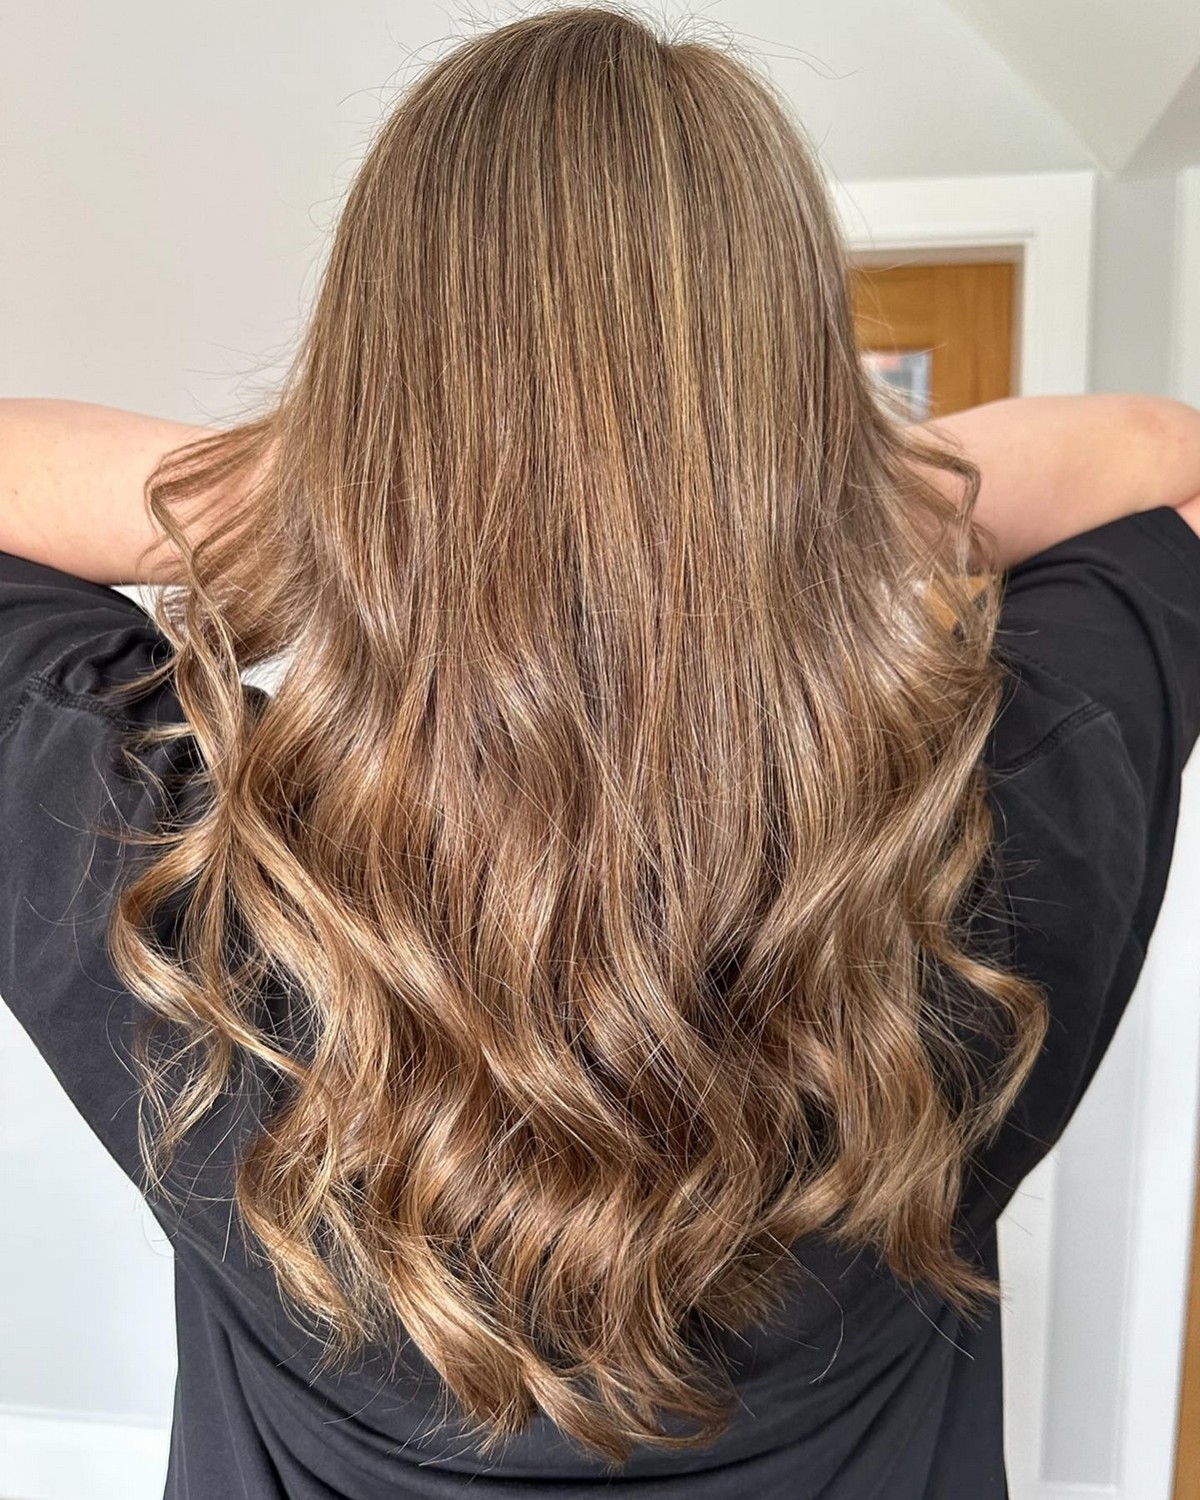 Long Shag With Loose Waves And A Center Part